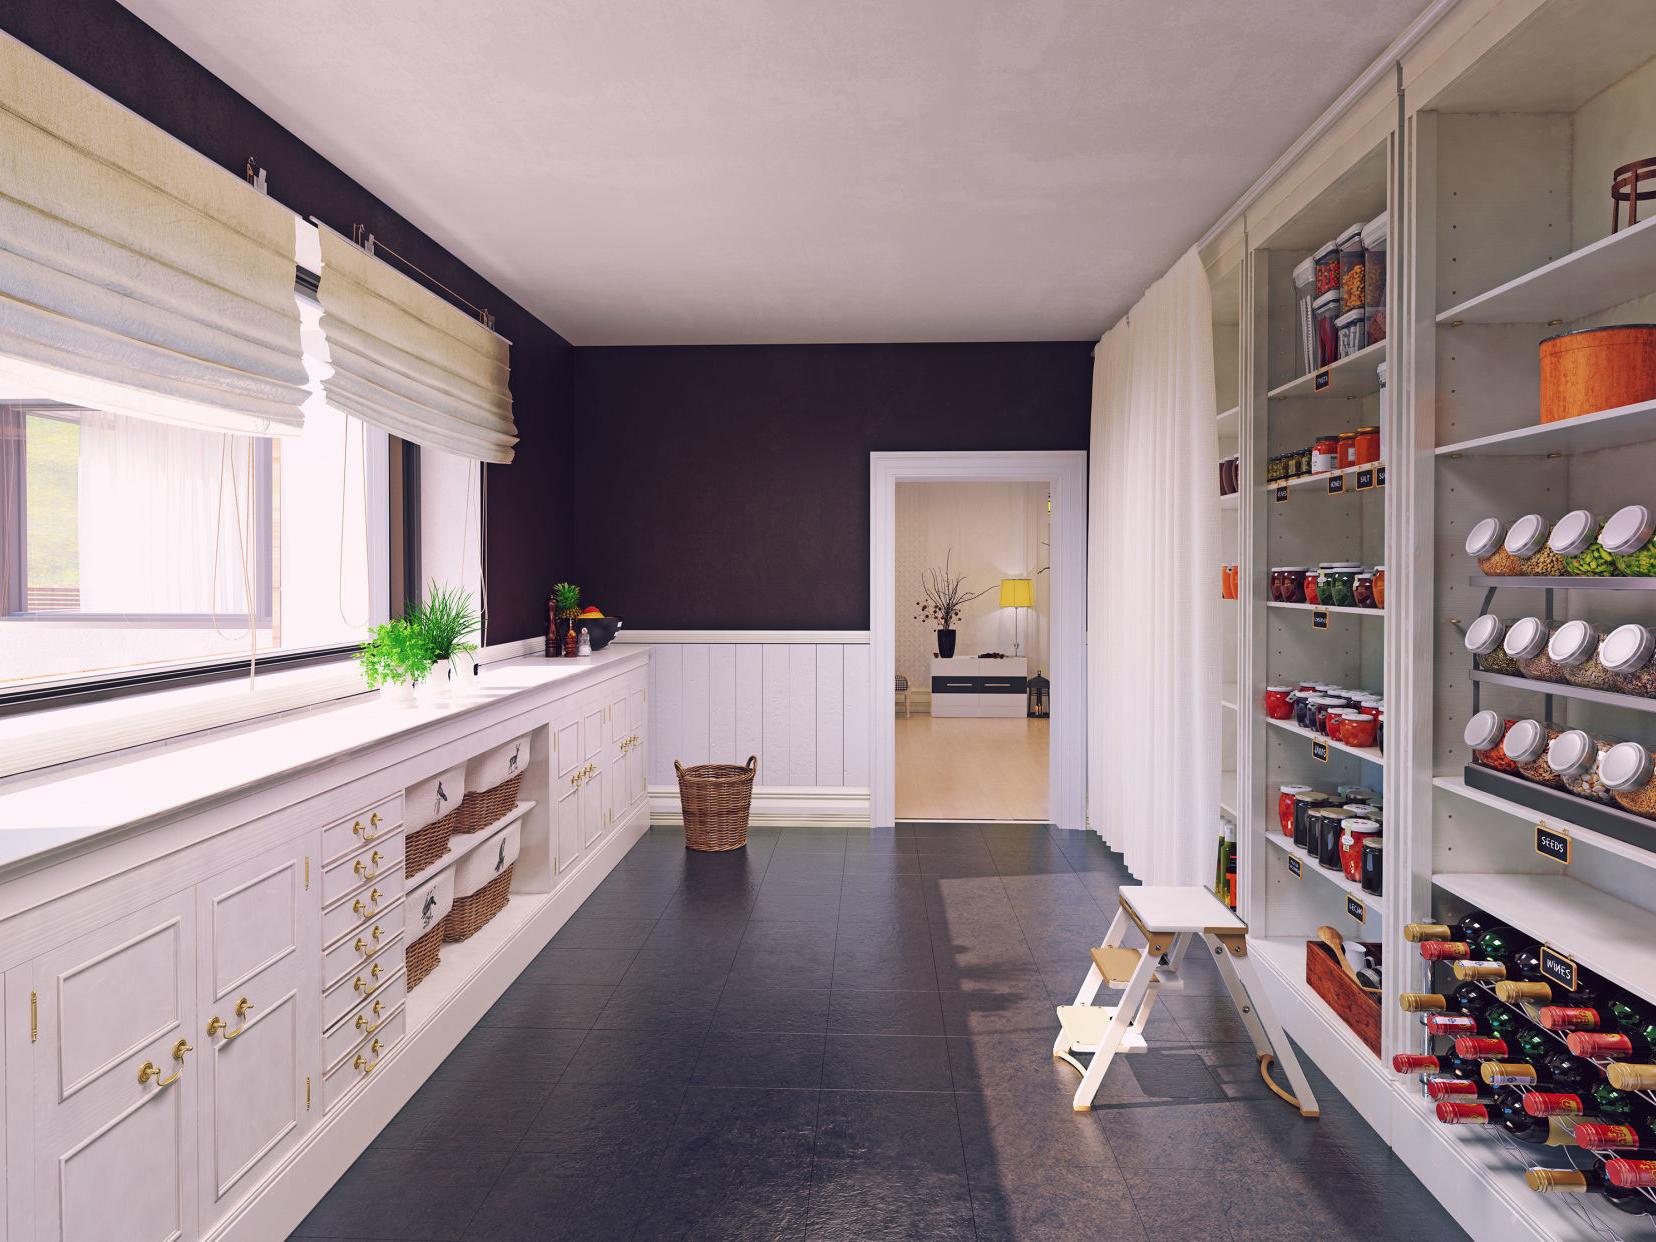 A Walk In Pantry Is Now The Most Popular Feature In The Kitchen Lifestyles Omaha Com